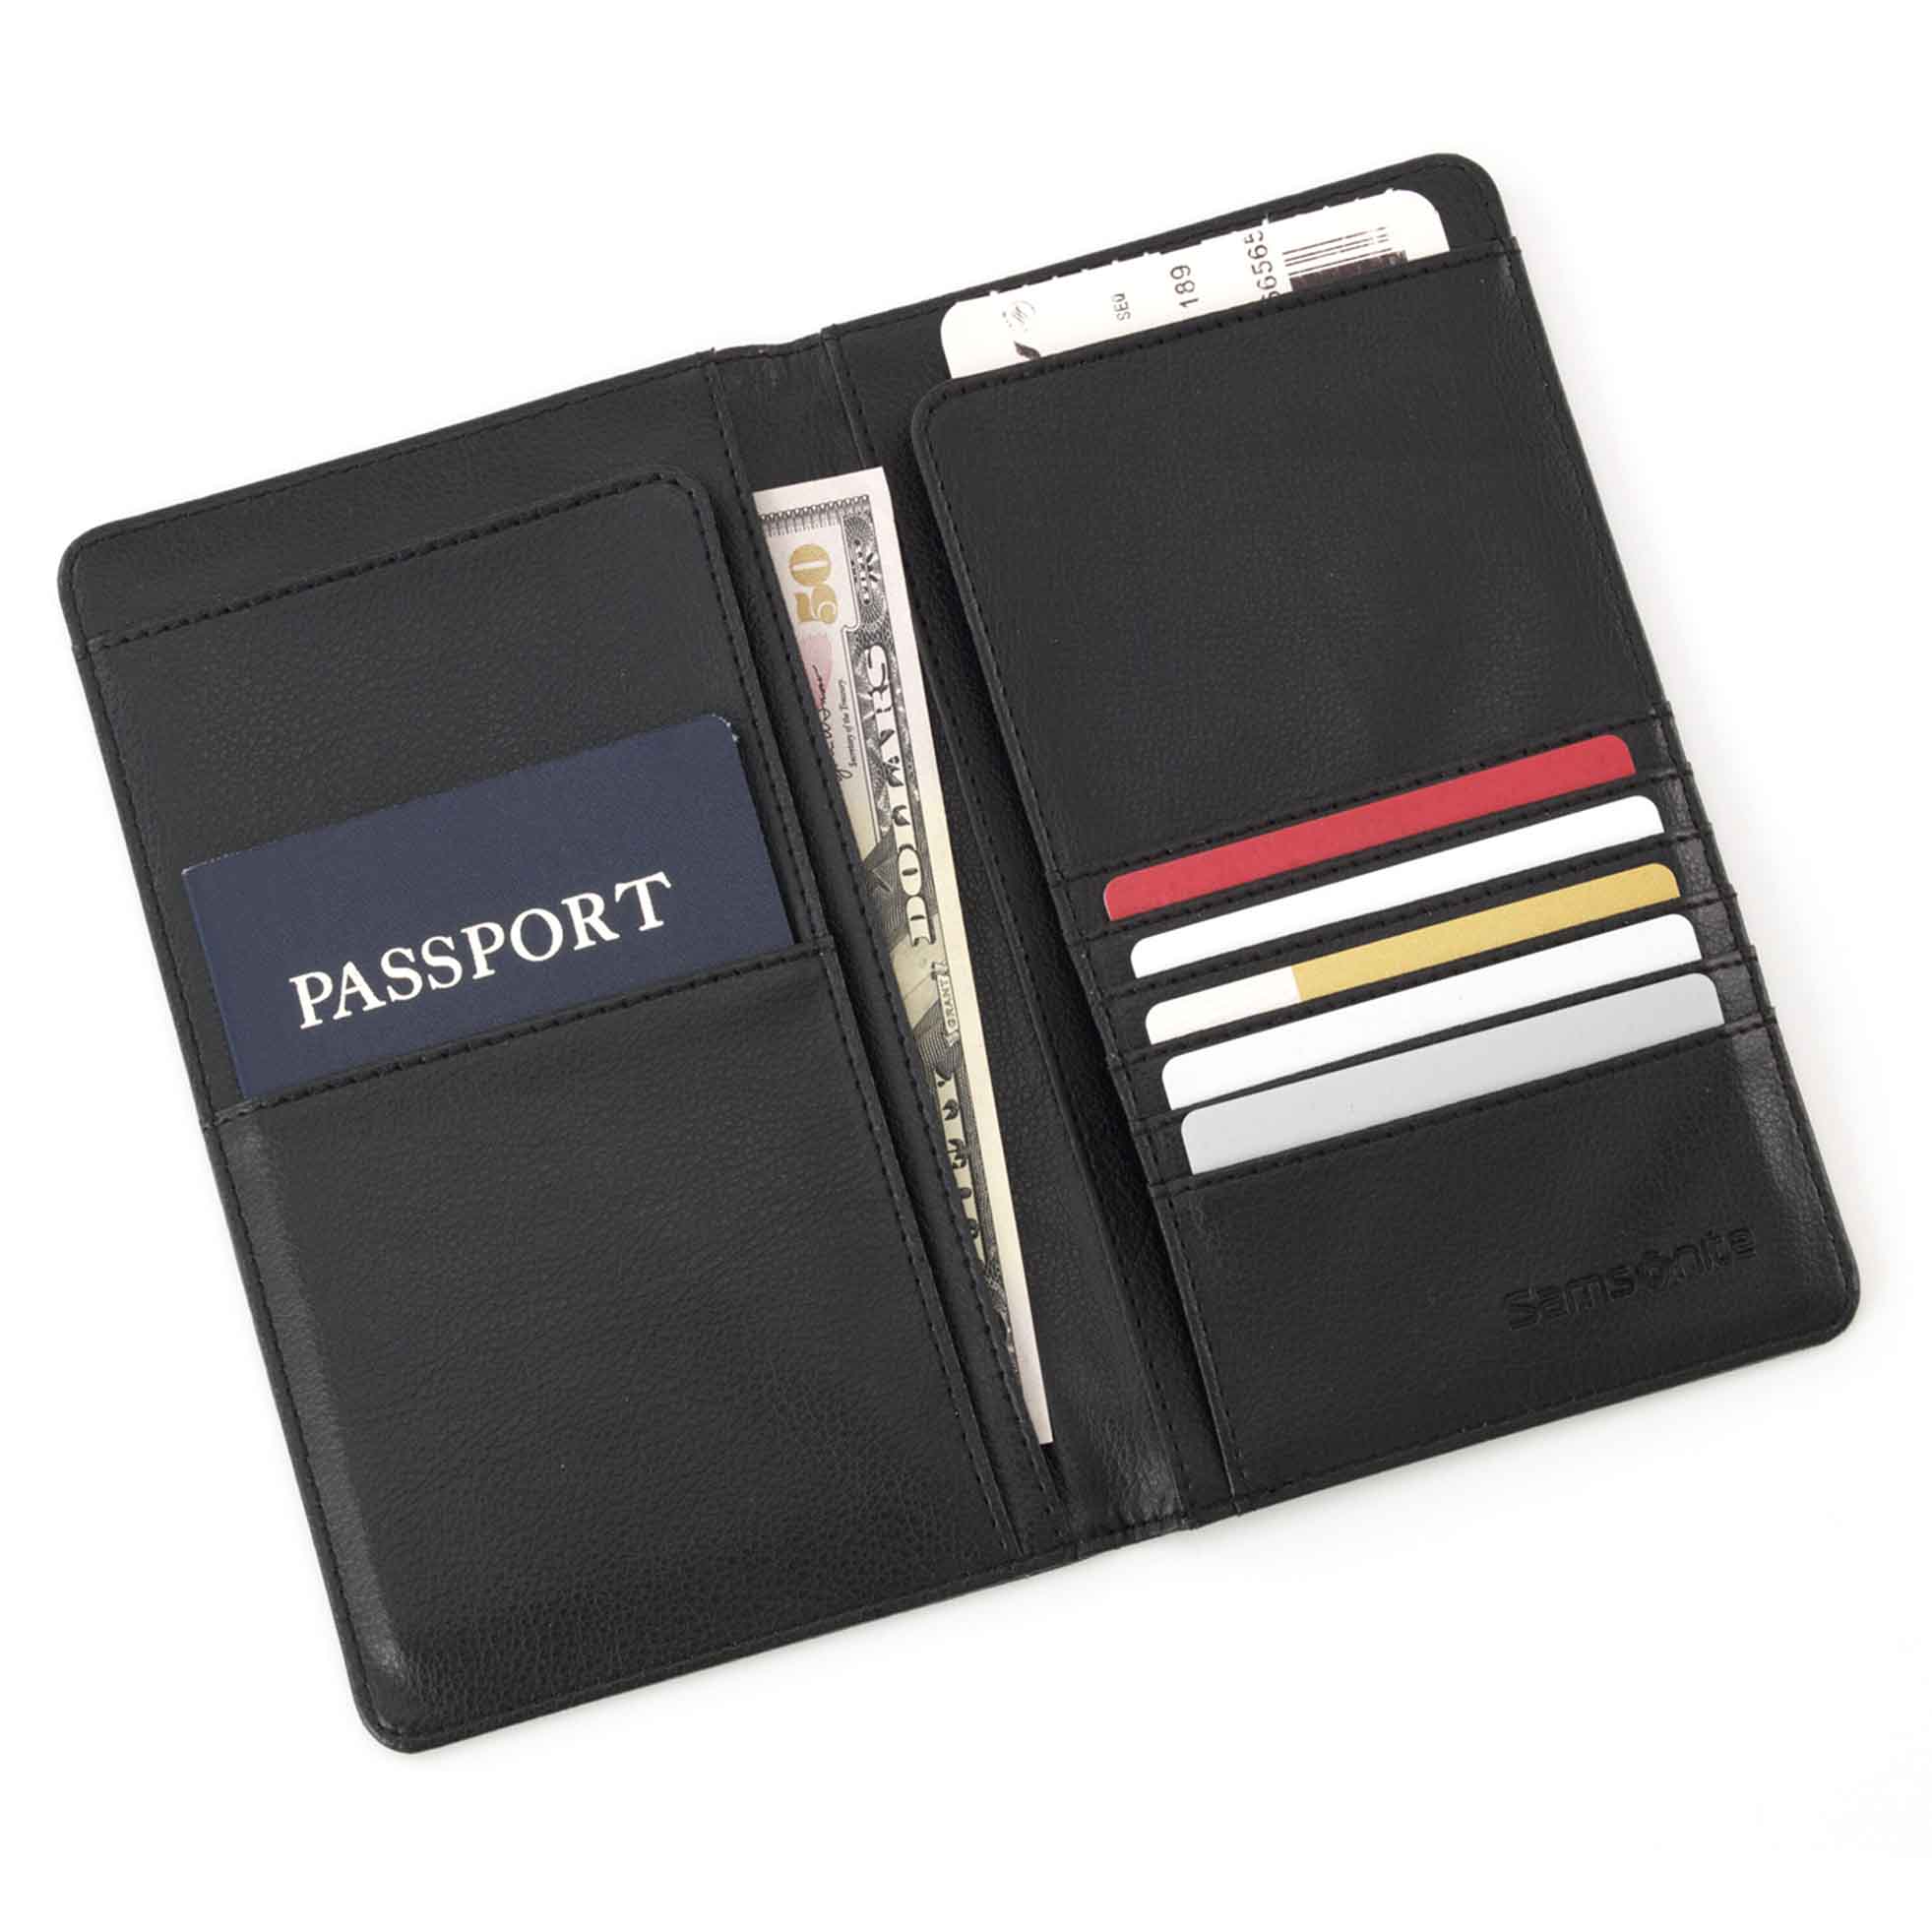 Samsonite Travel Wallet with passport, cash and card holders